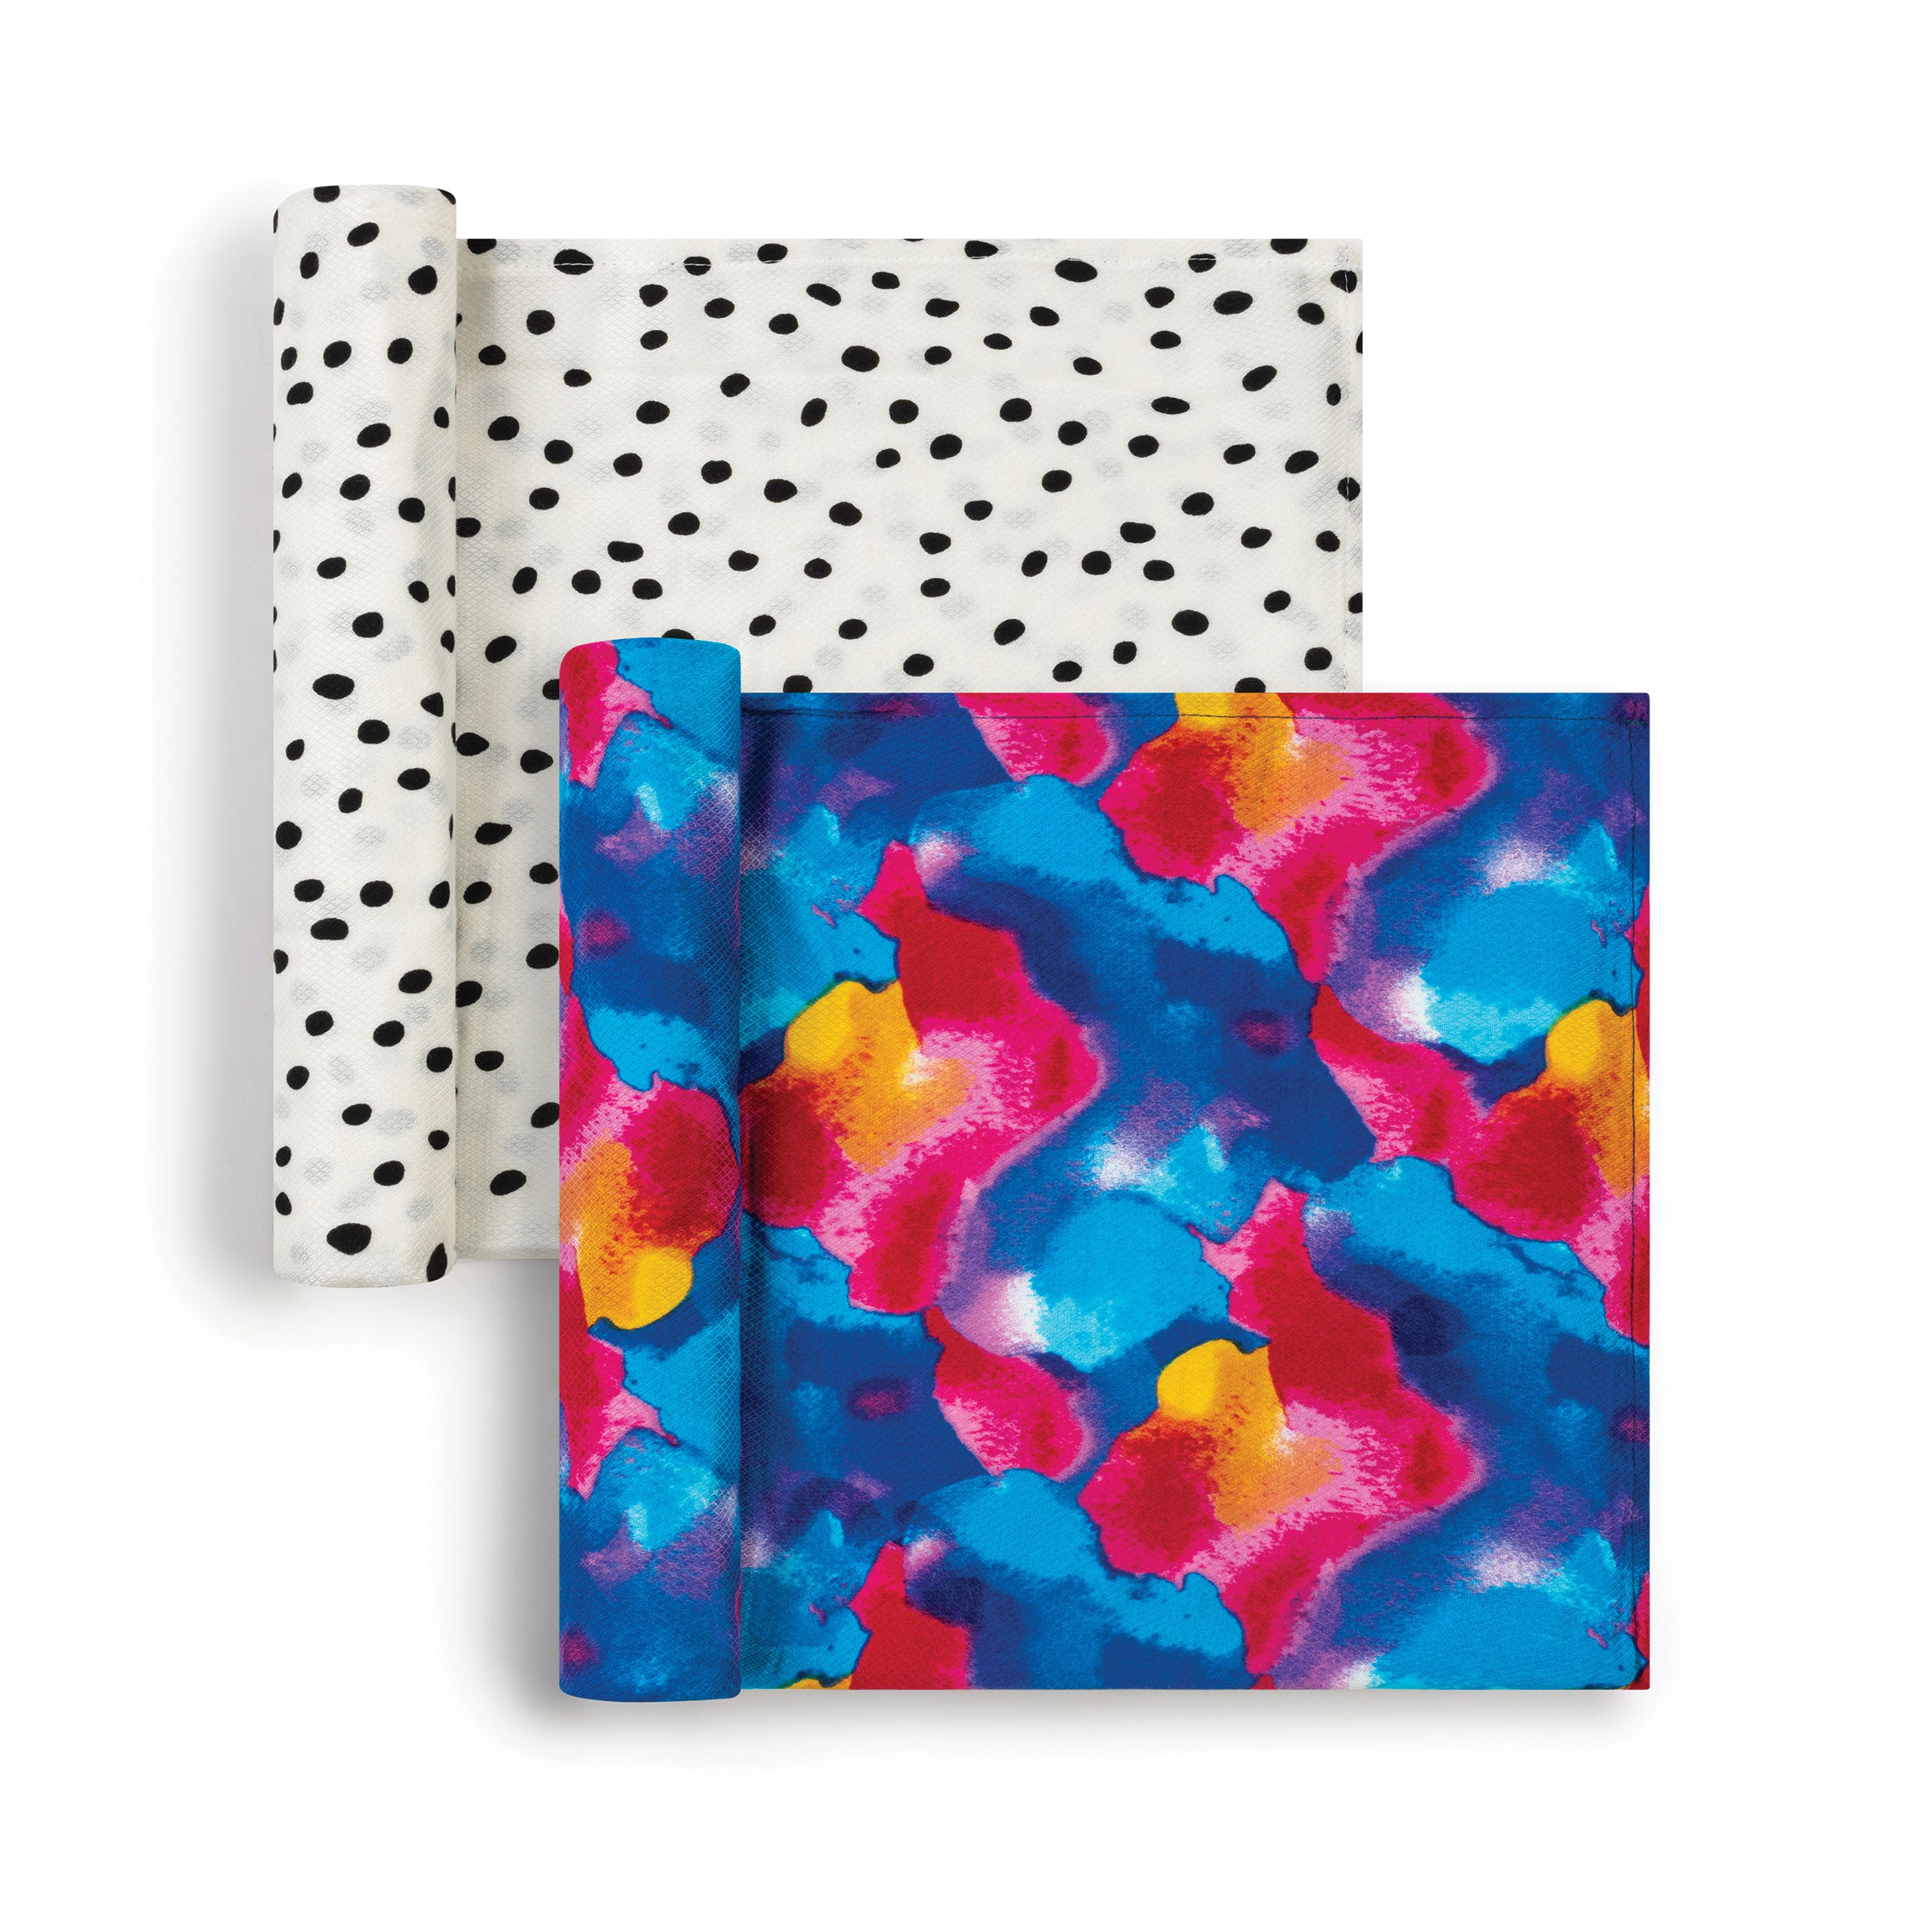 Kaffle Swaddle Blankets - Recycled Packaging